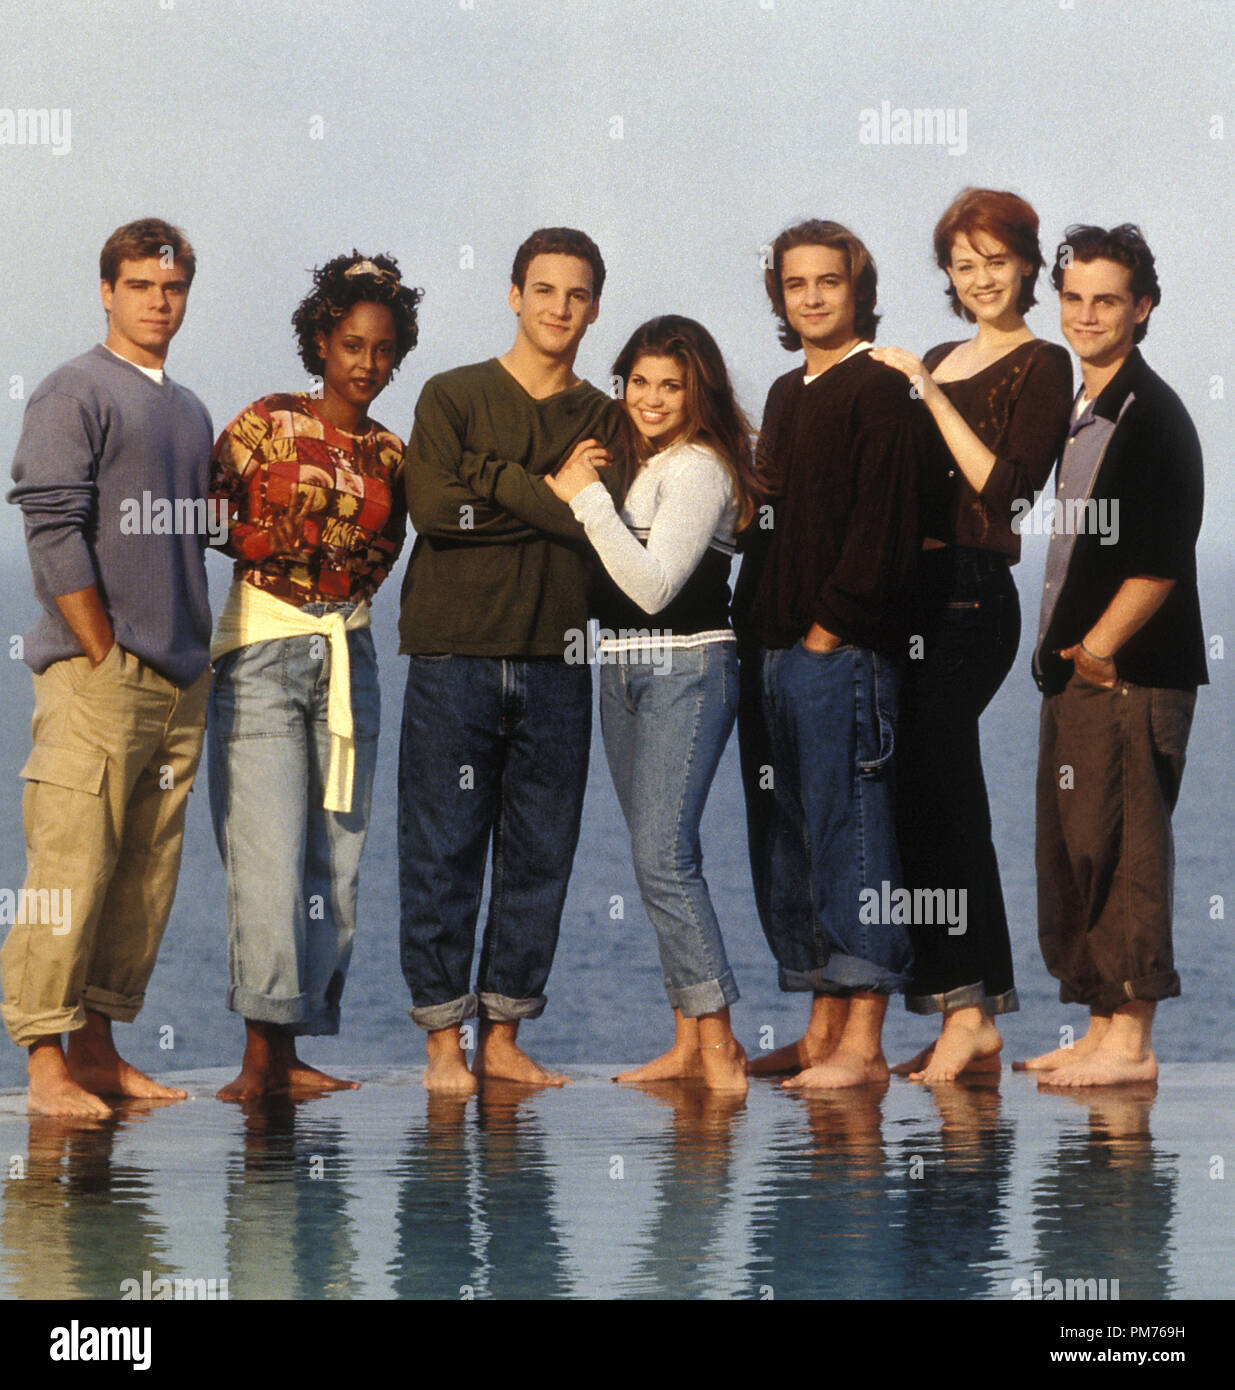 Film Still / Publicity Still from "Boy Meets World" Matthew Lawrence, Trina  McGee, Ben Savage, Danielle Fishel, Will Friedle, Maitland Ward, Rider  Strong 1999 File Reference # 30973167THA For Editorial Use Only -